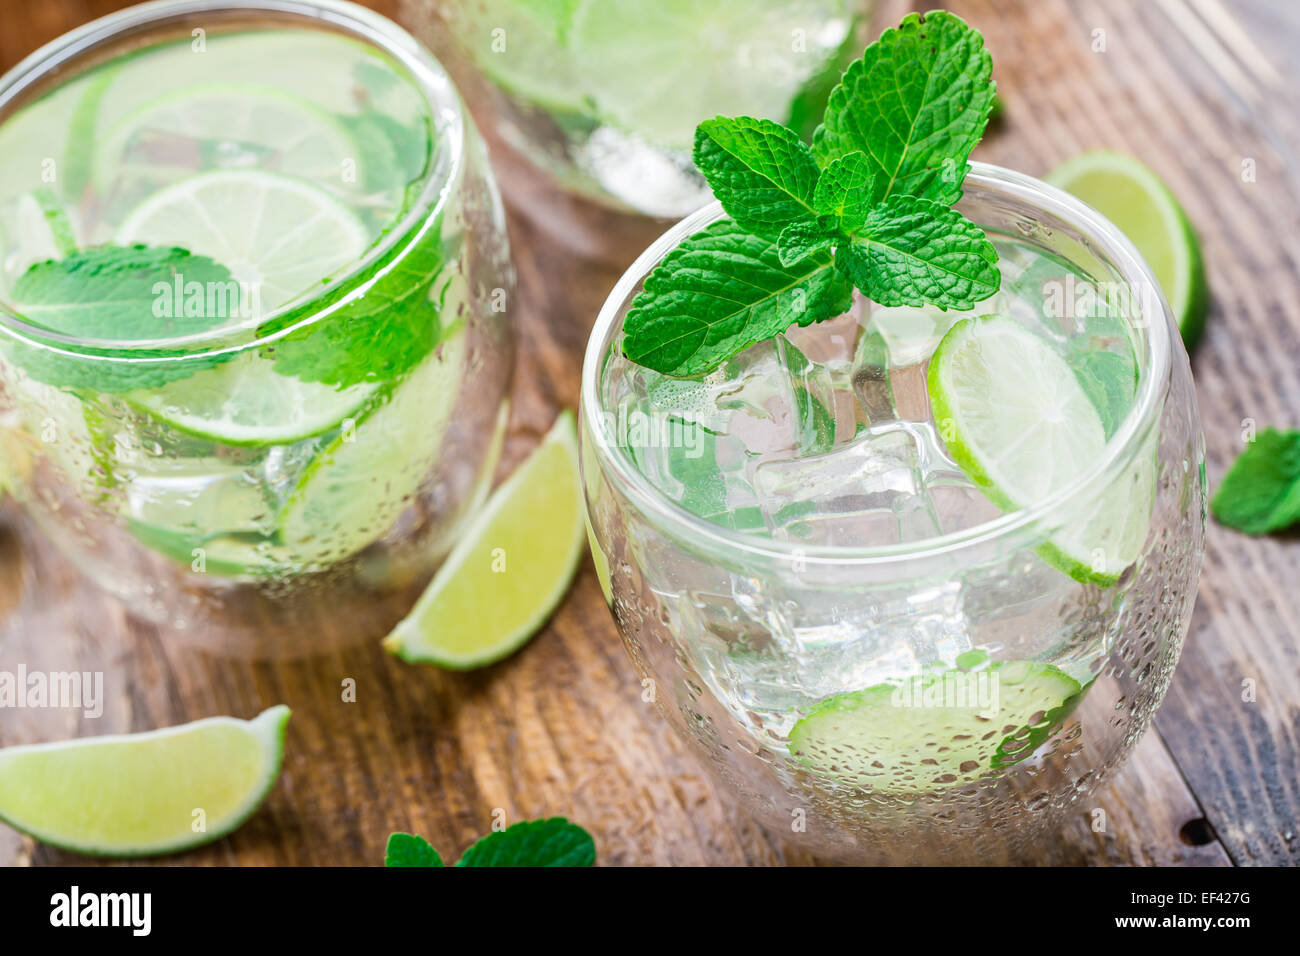 Cocktail with lime and mint Stock Photo